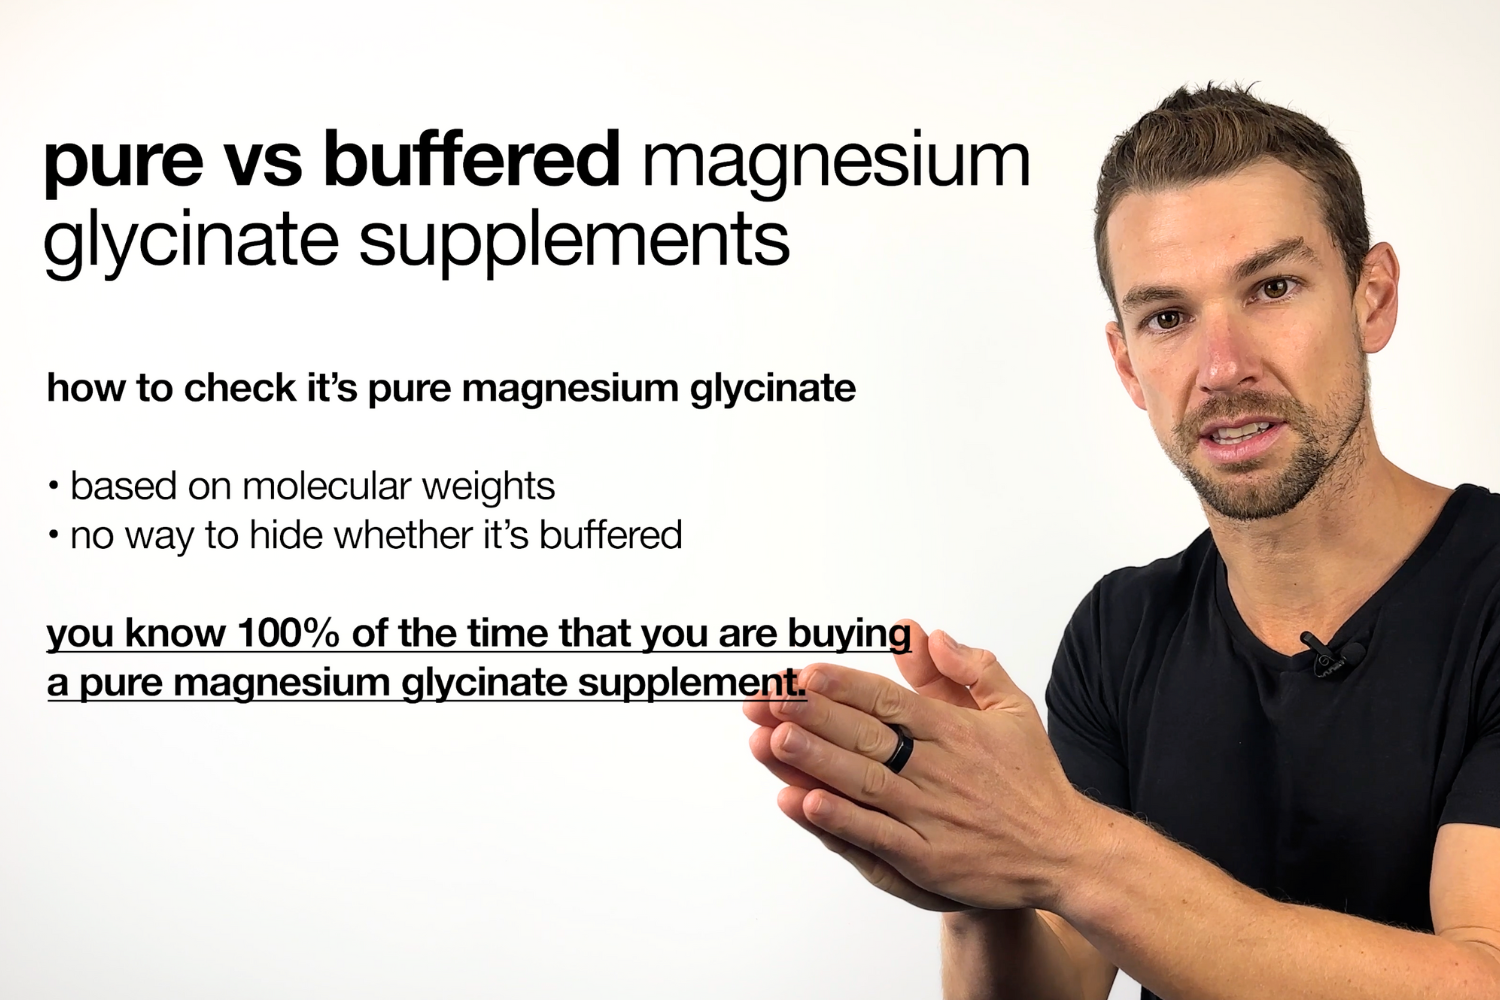 Magnesium Glycinate: Make Sure You're Buying Pure Supplements & Not Buffered